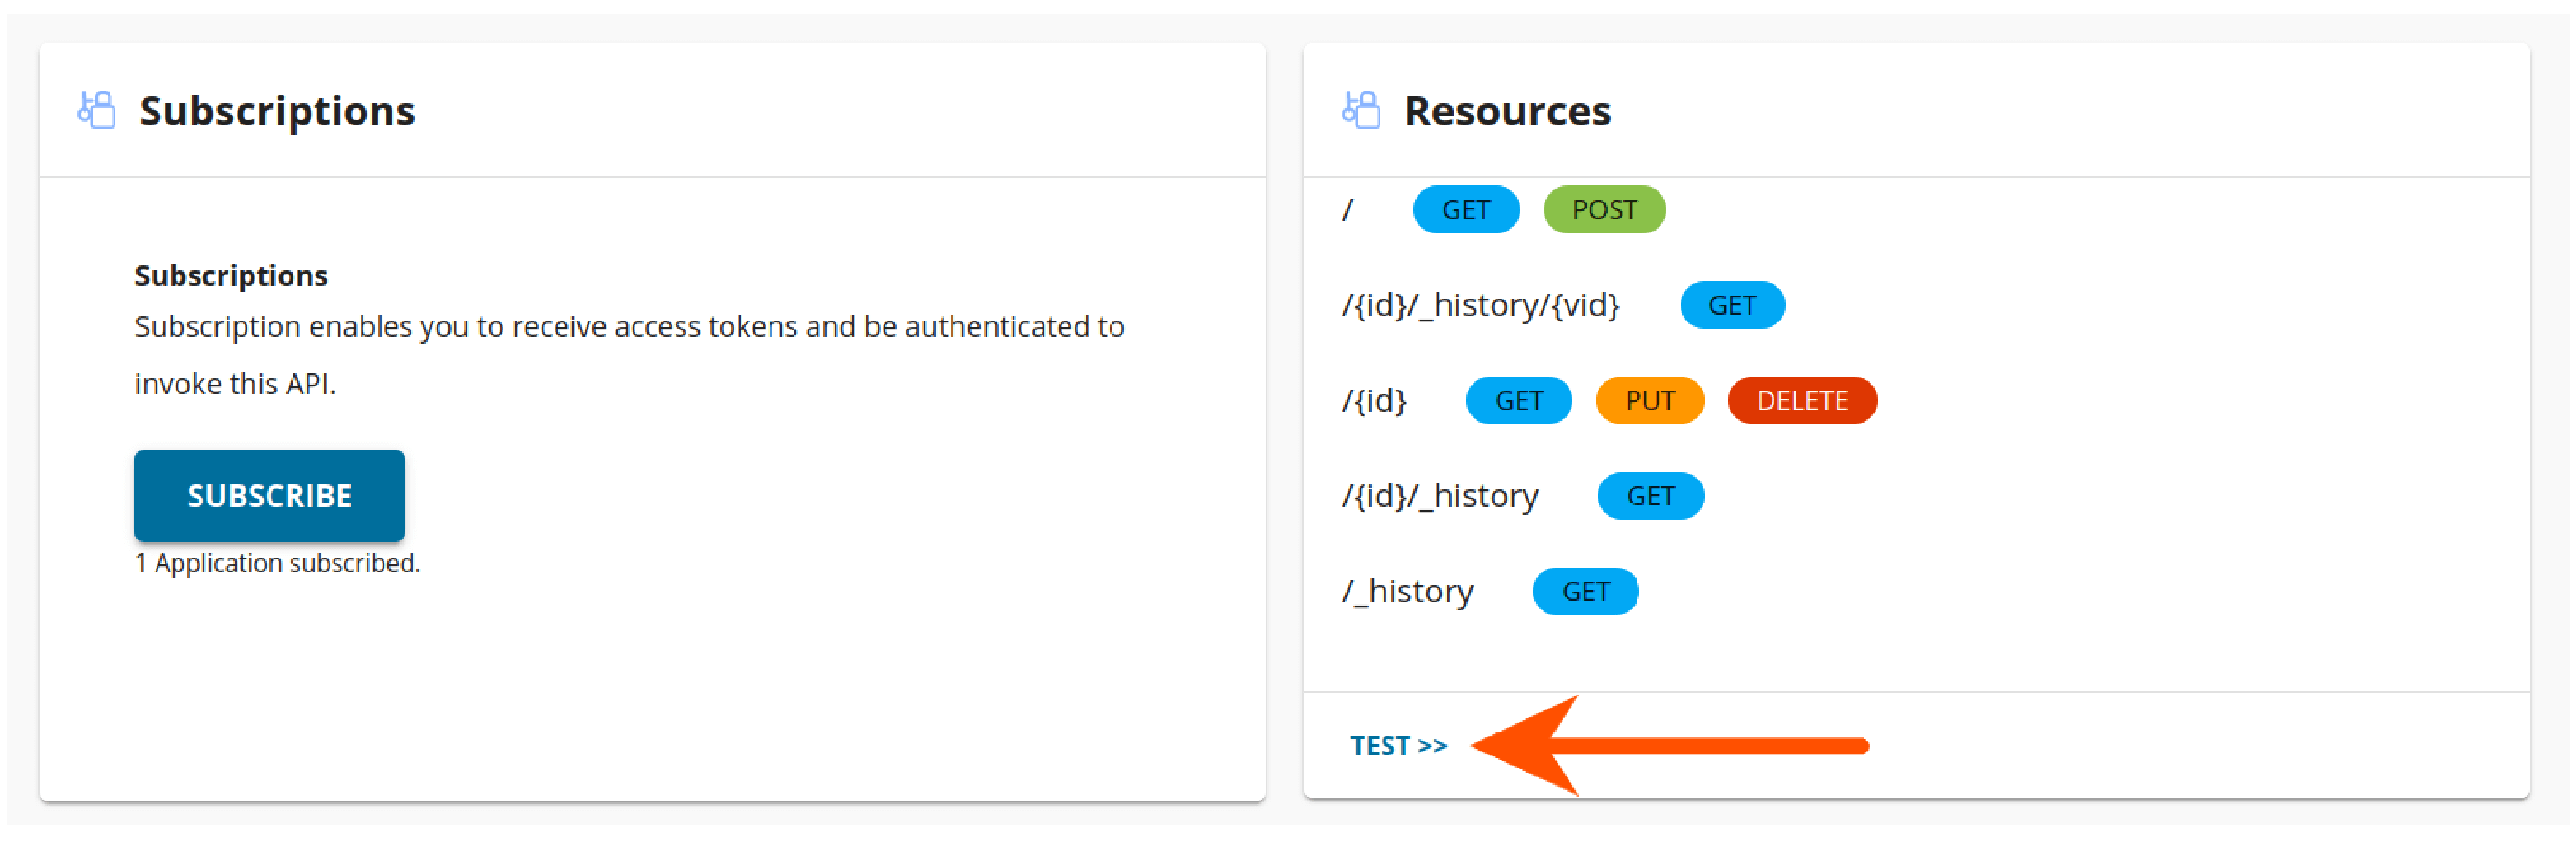 Click on an API and you can see the overview page